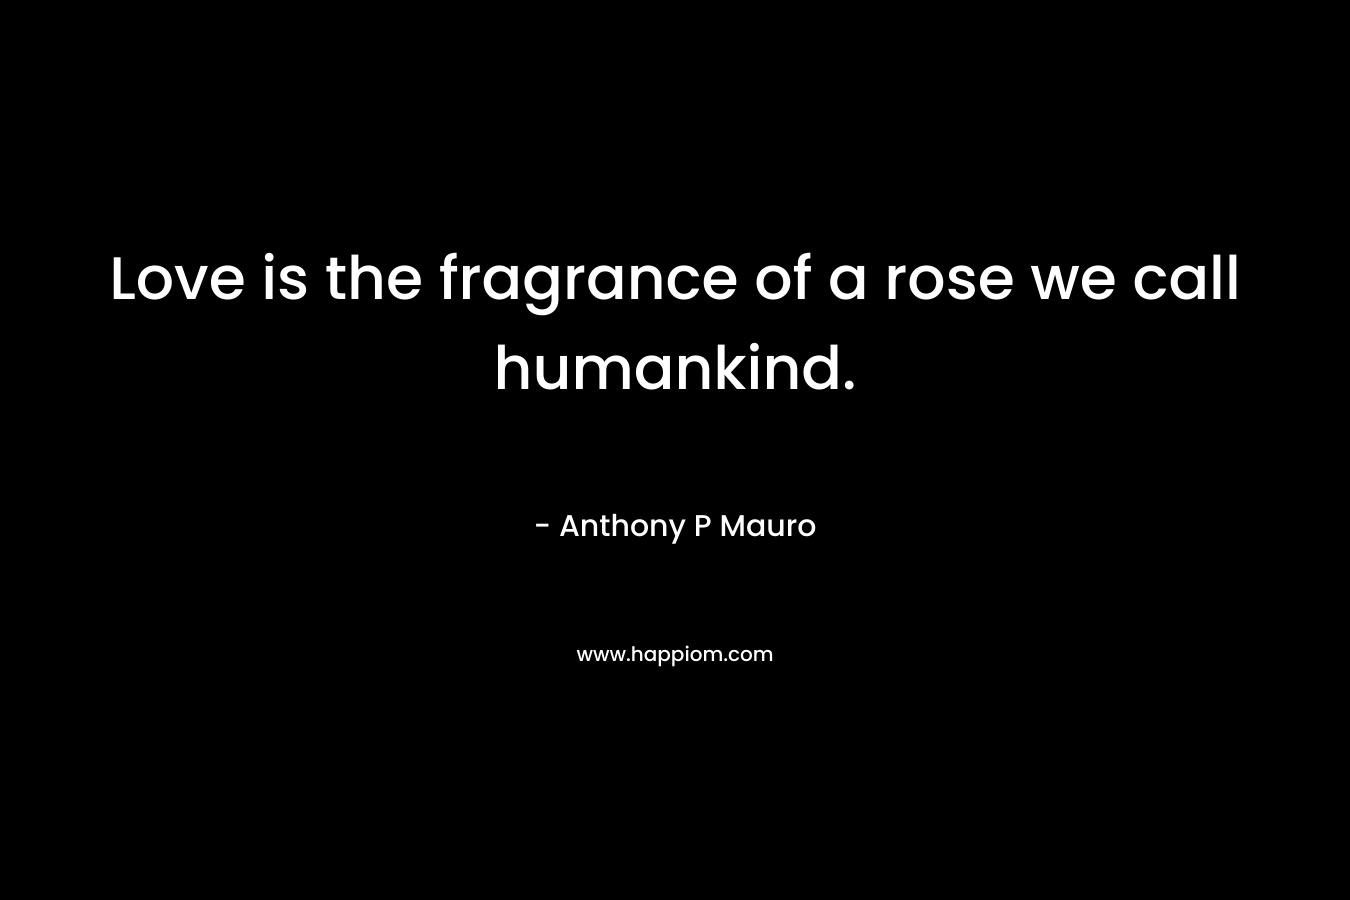 Love is the fragrance of a rose we call humankind.